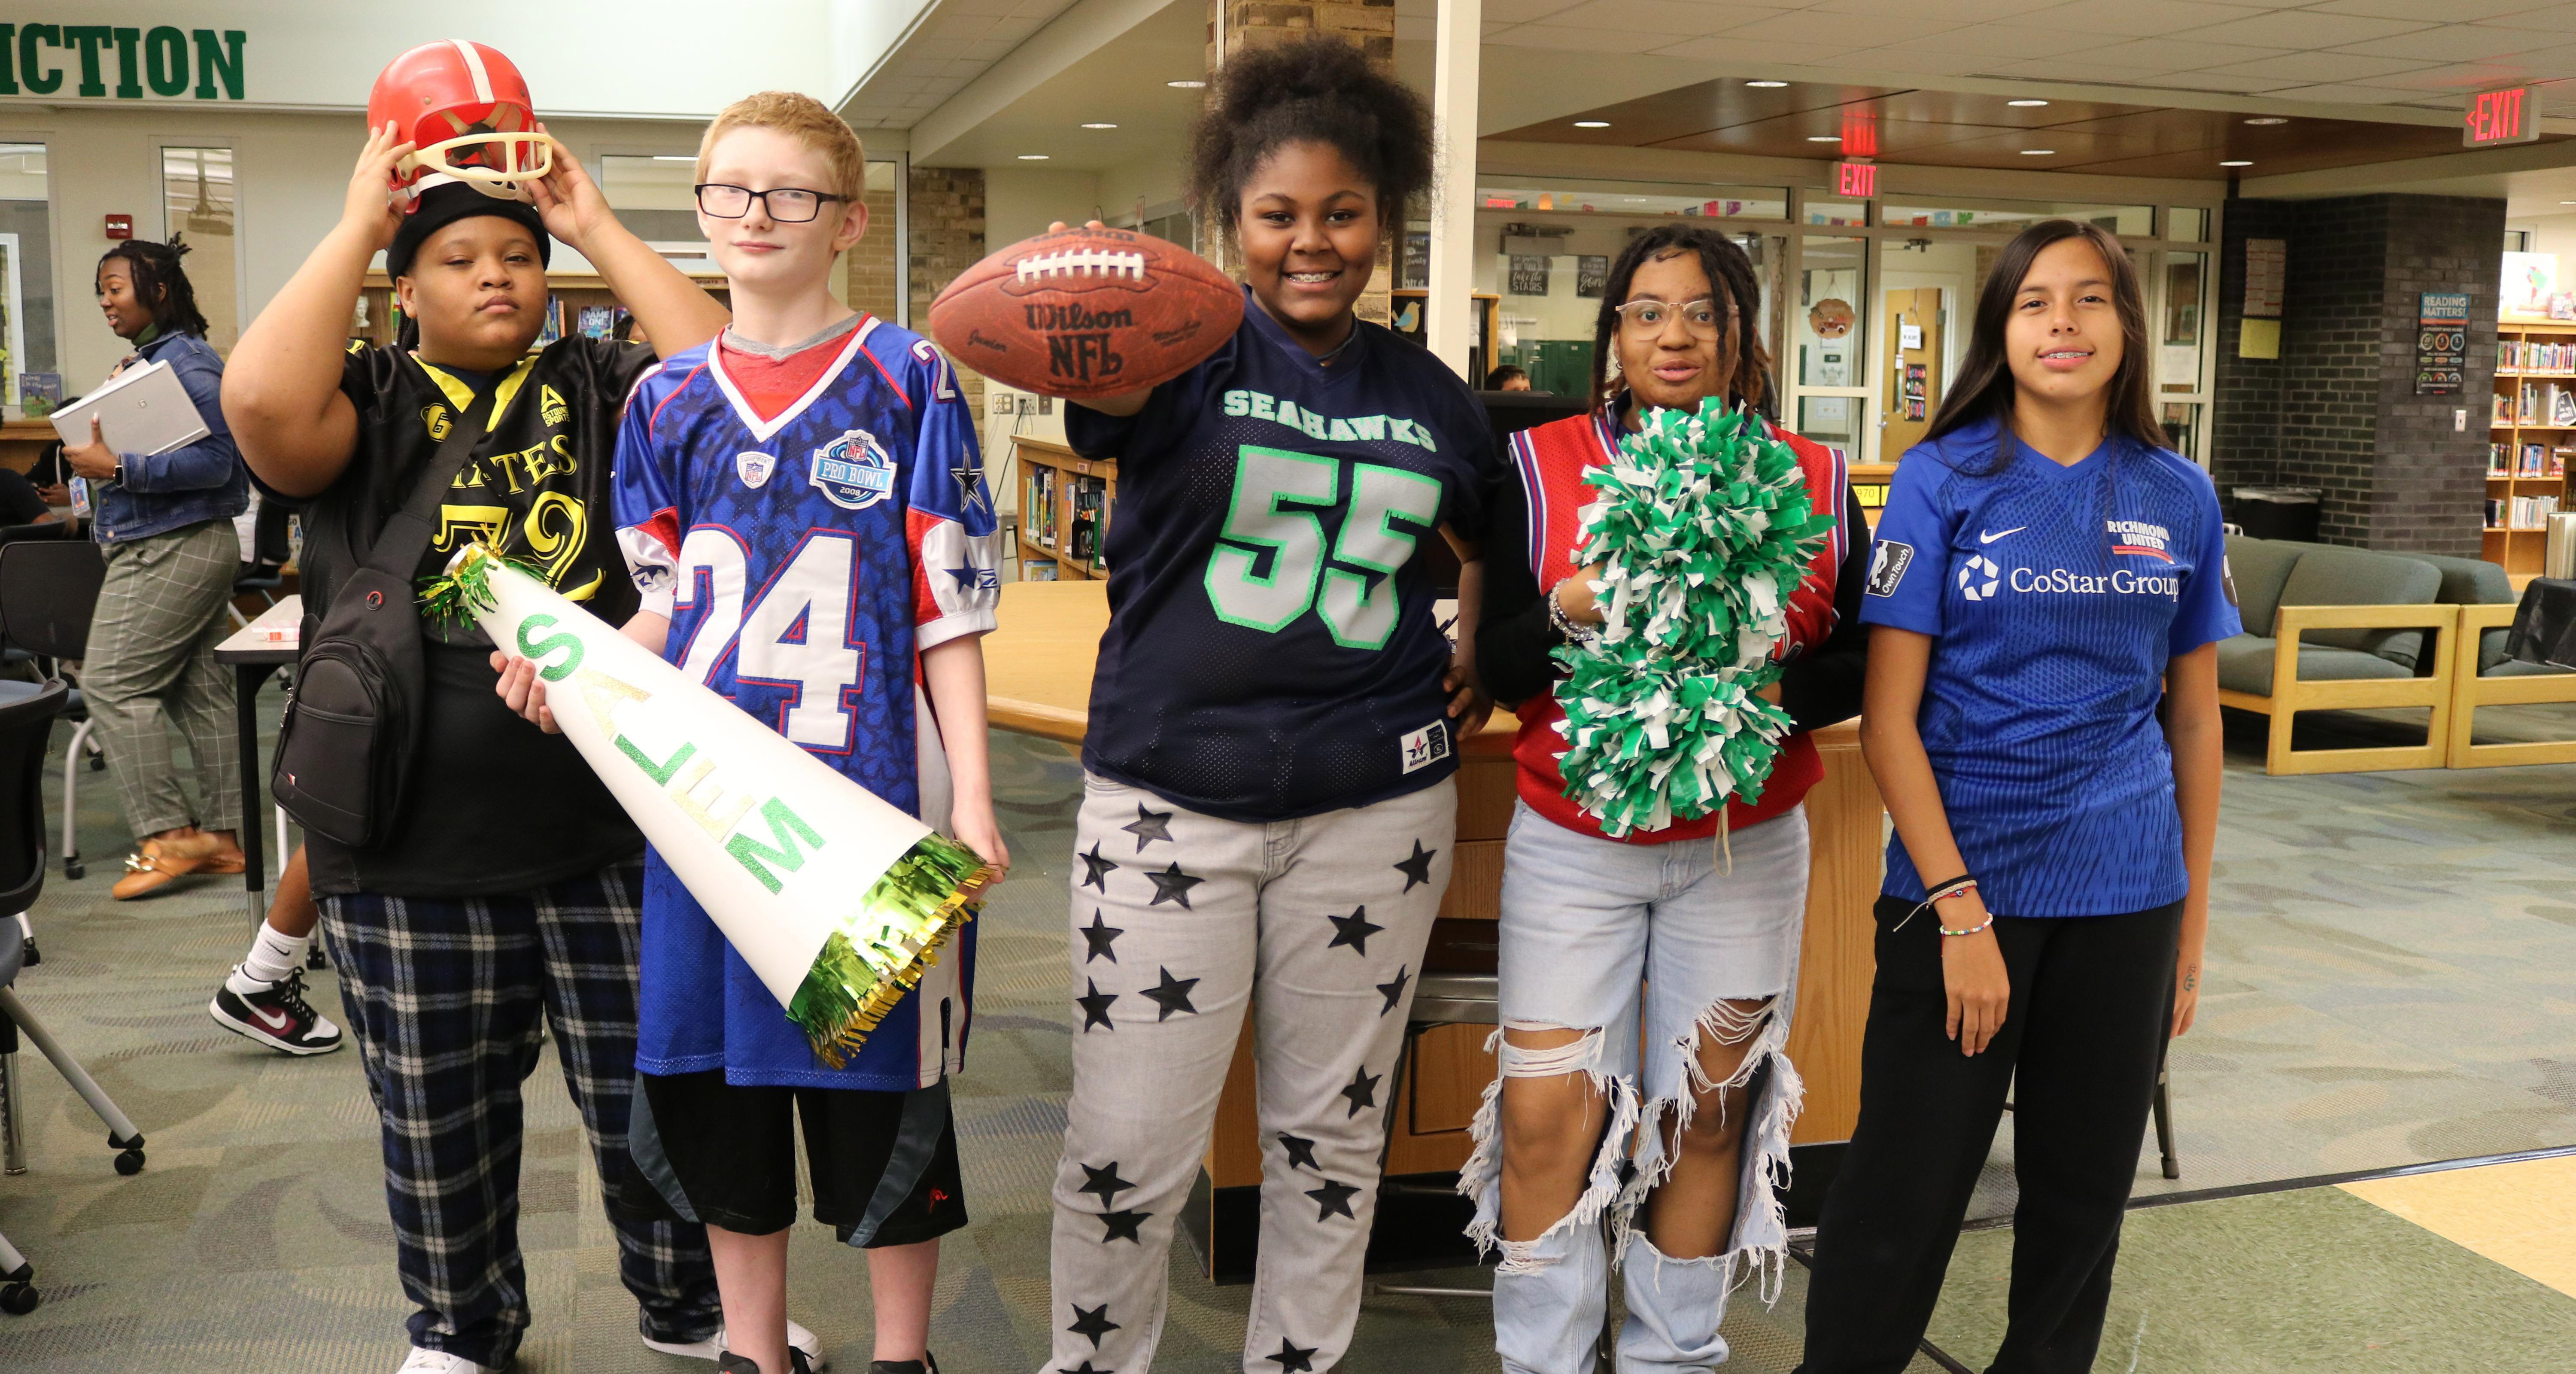 Five students wearing a jersey pose for a photo in the school library